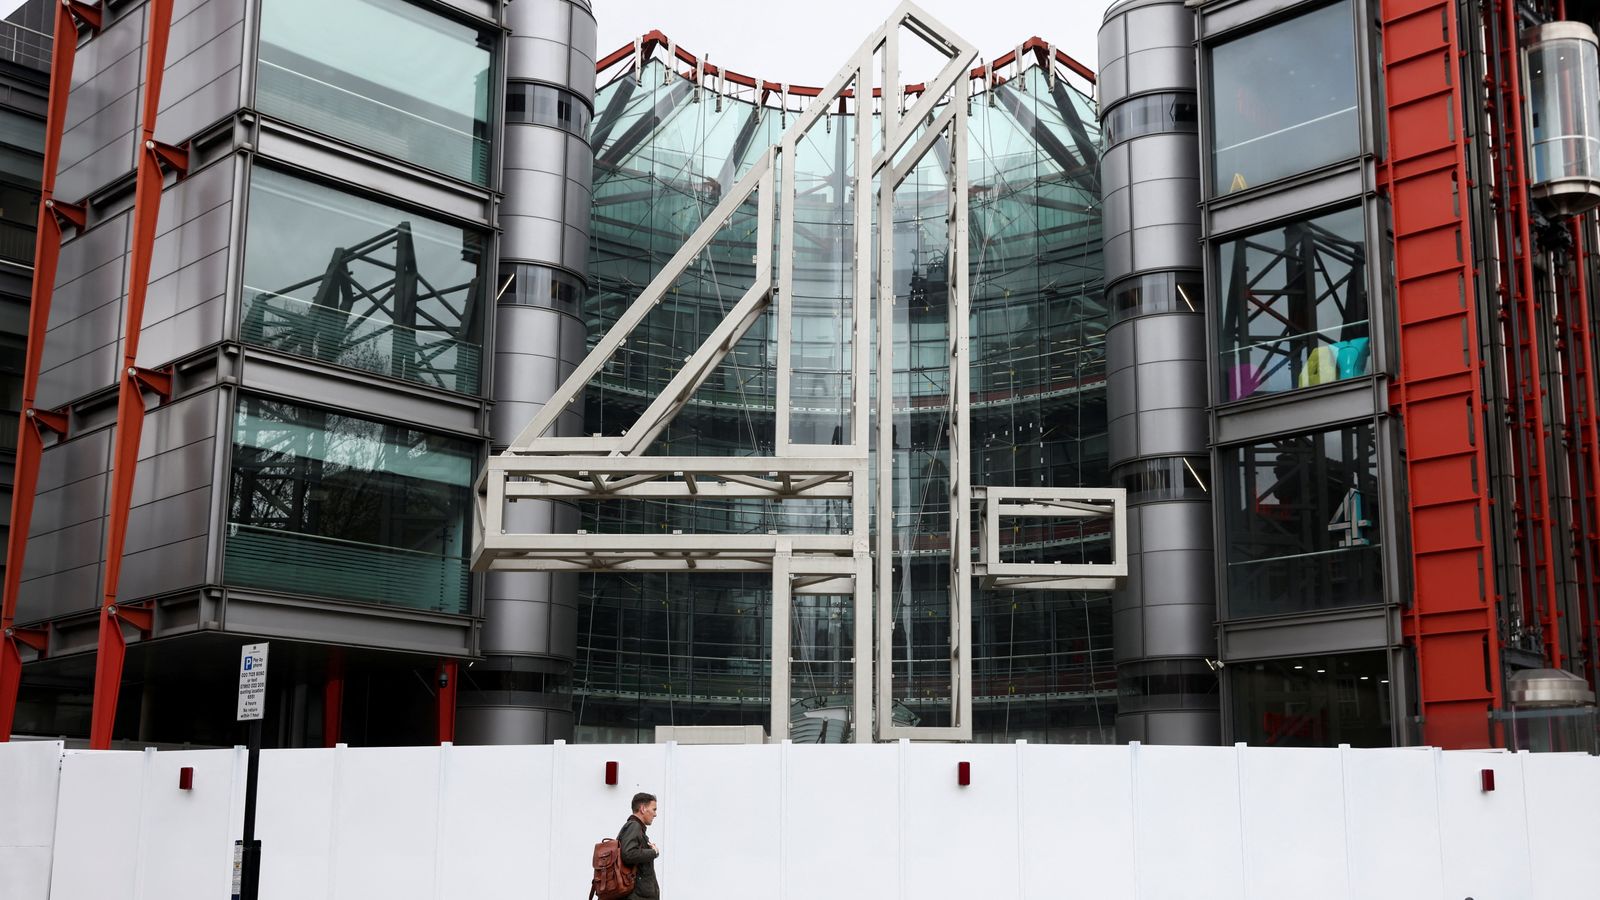 Plans to privatise Channel 4 axed, government confirms